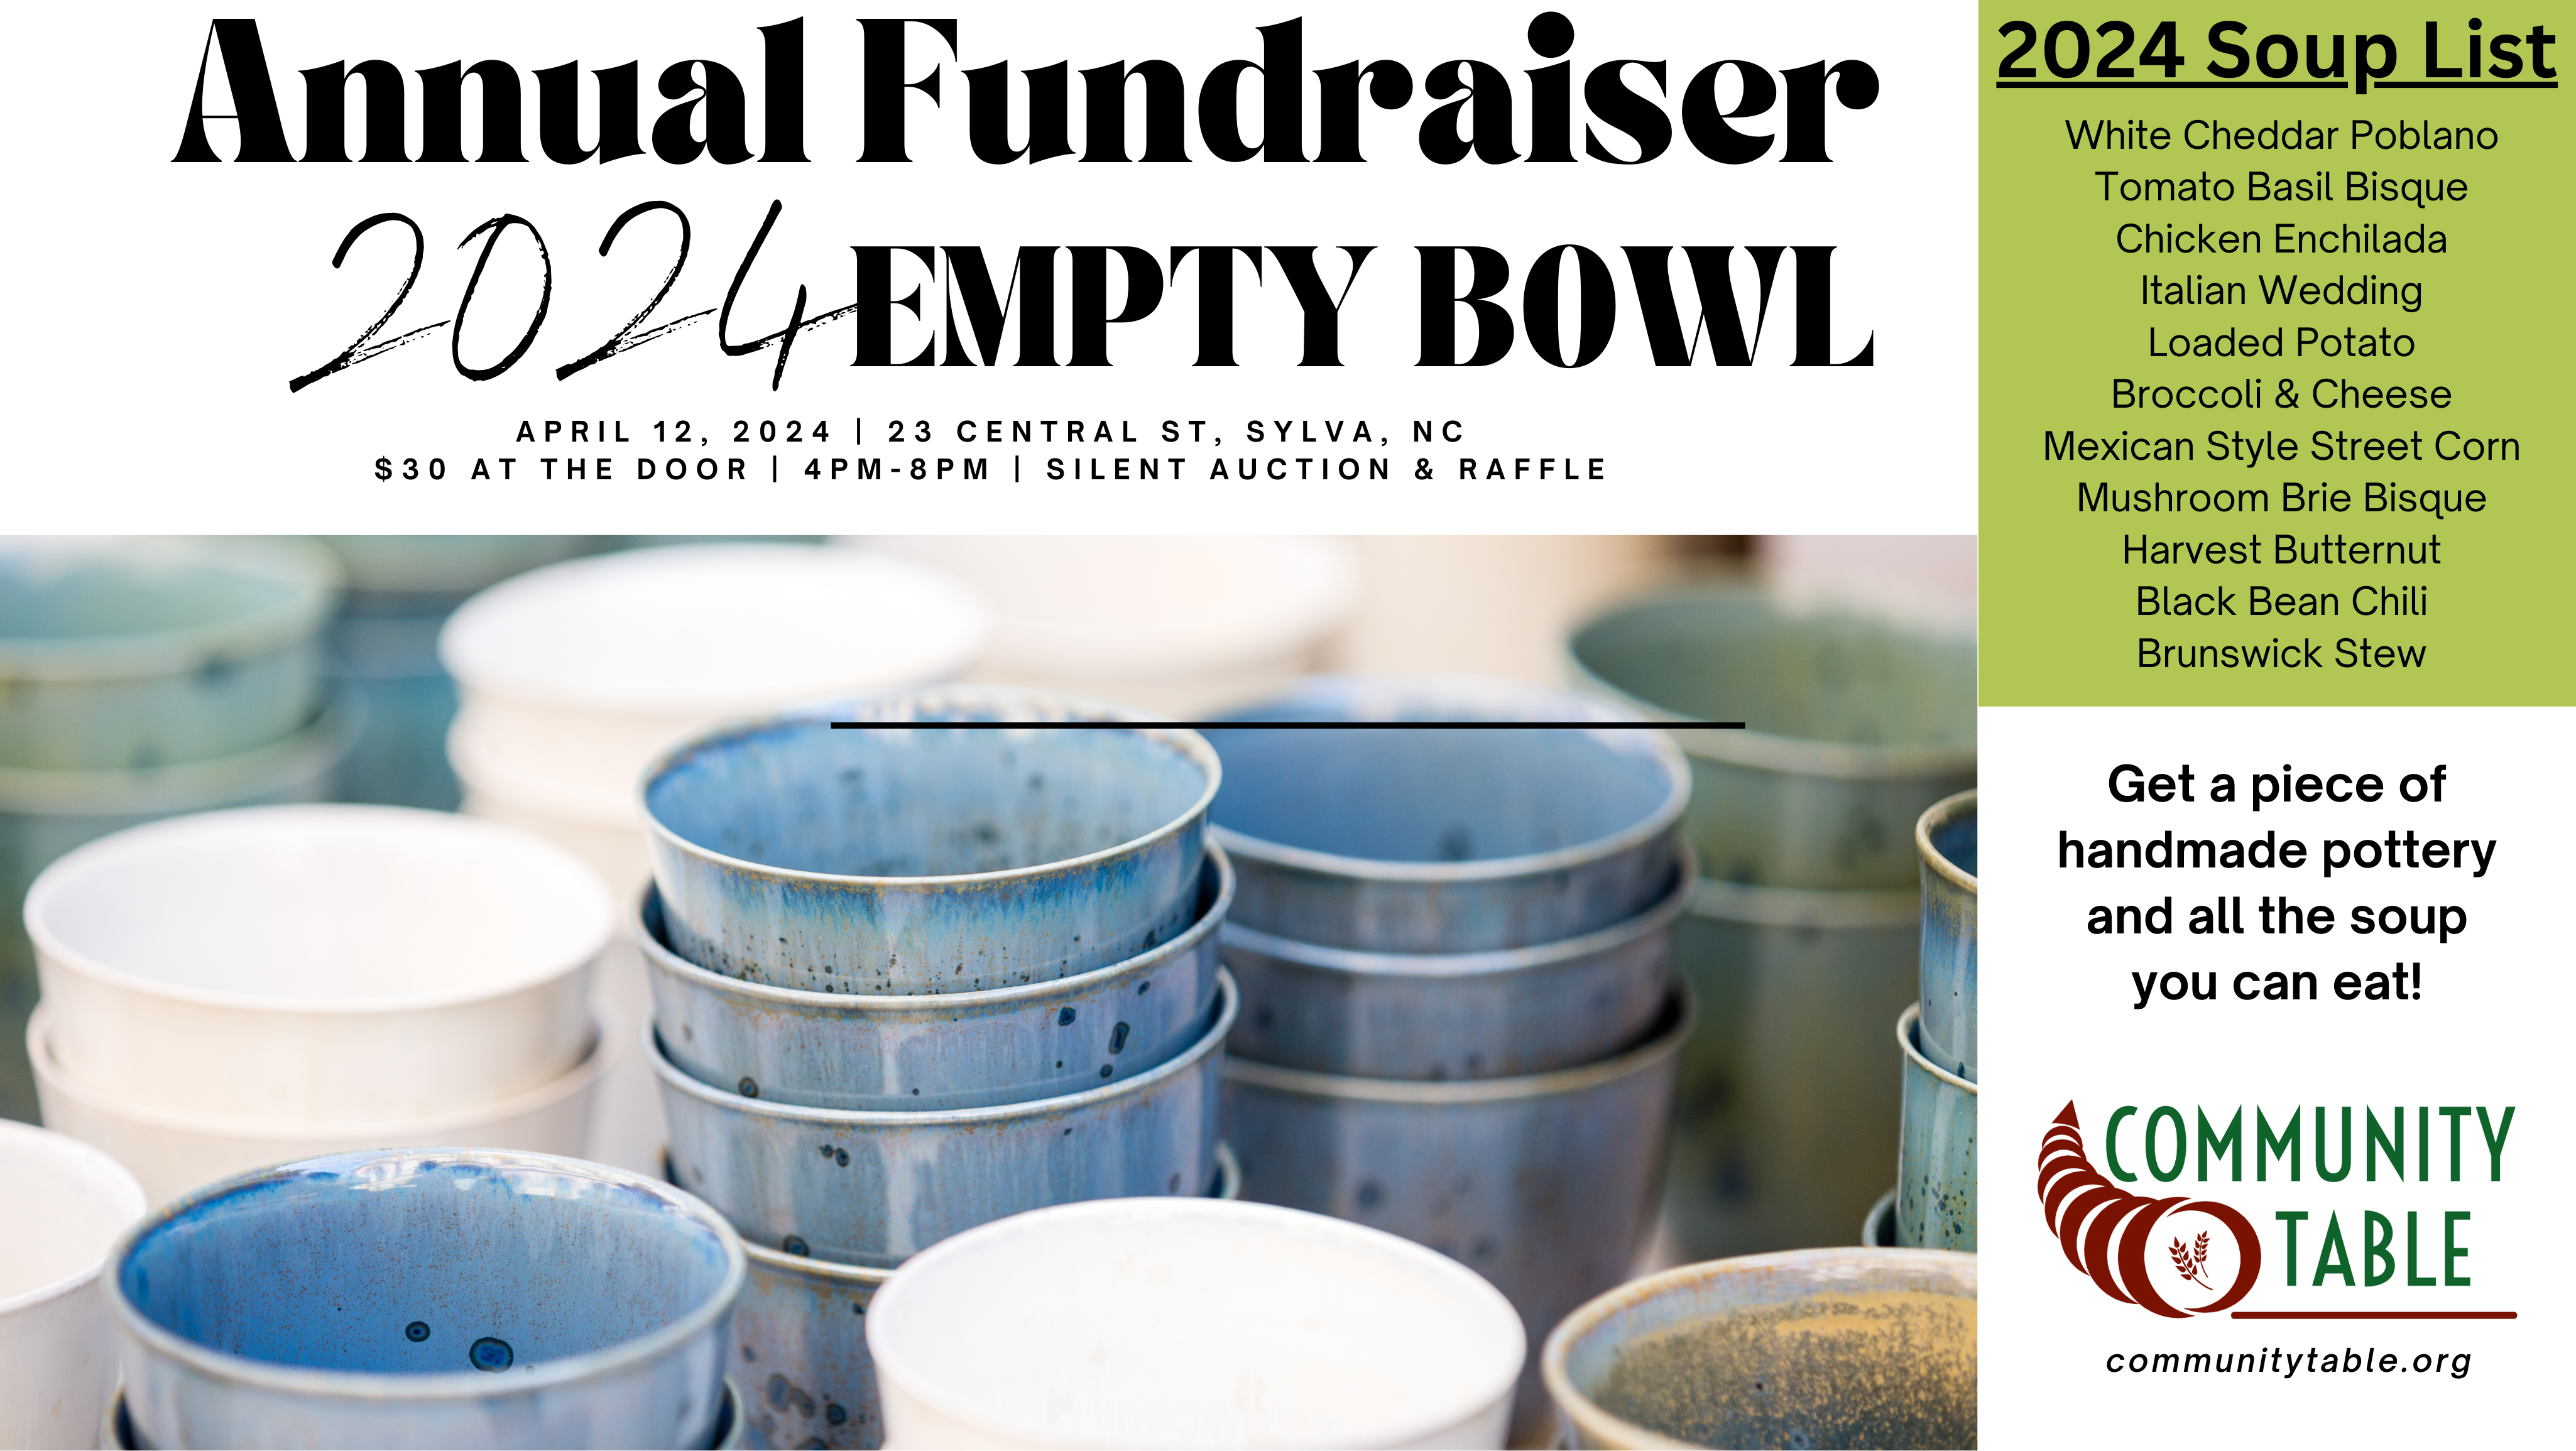 Community Table Fundraiser - Empty Bowl 2024 - Friday April 12, 2024, 4pm-8pm, 23 Central St, Sylva, NC - $30 at the door